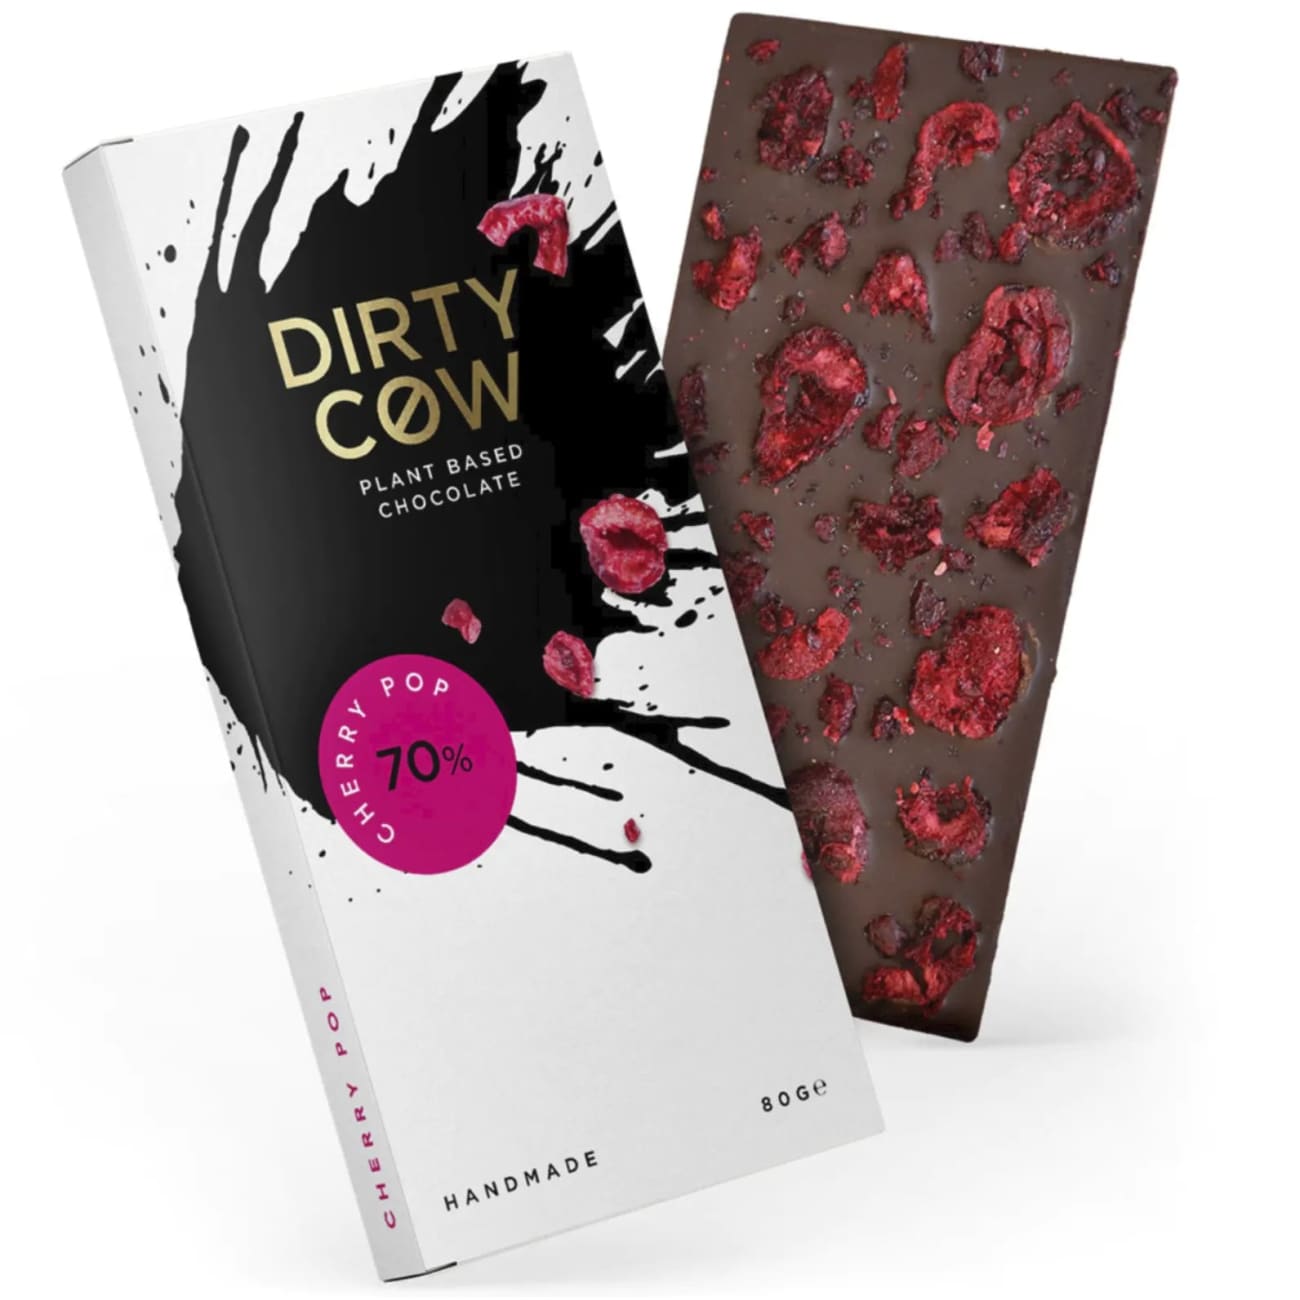 Dirty Cow Cherry Pop Pant Based Chocolate - Dirty Cow Cherry